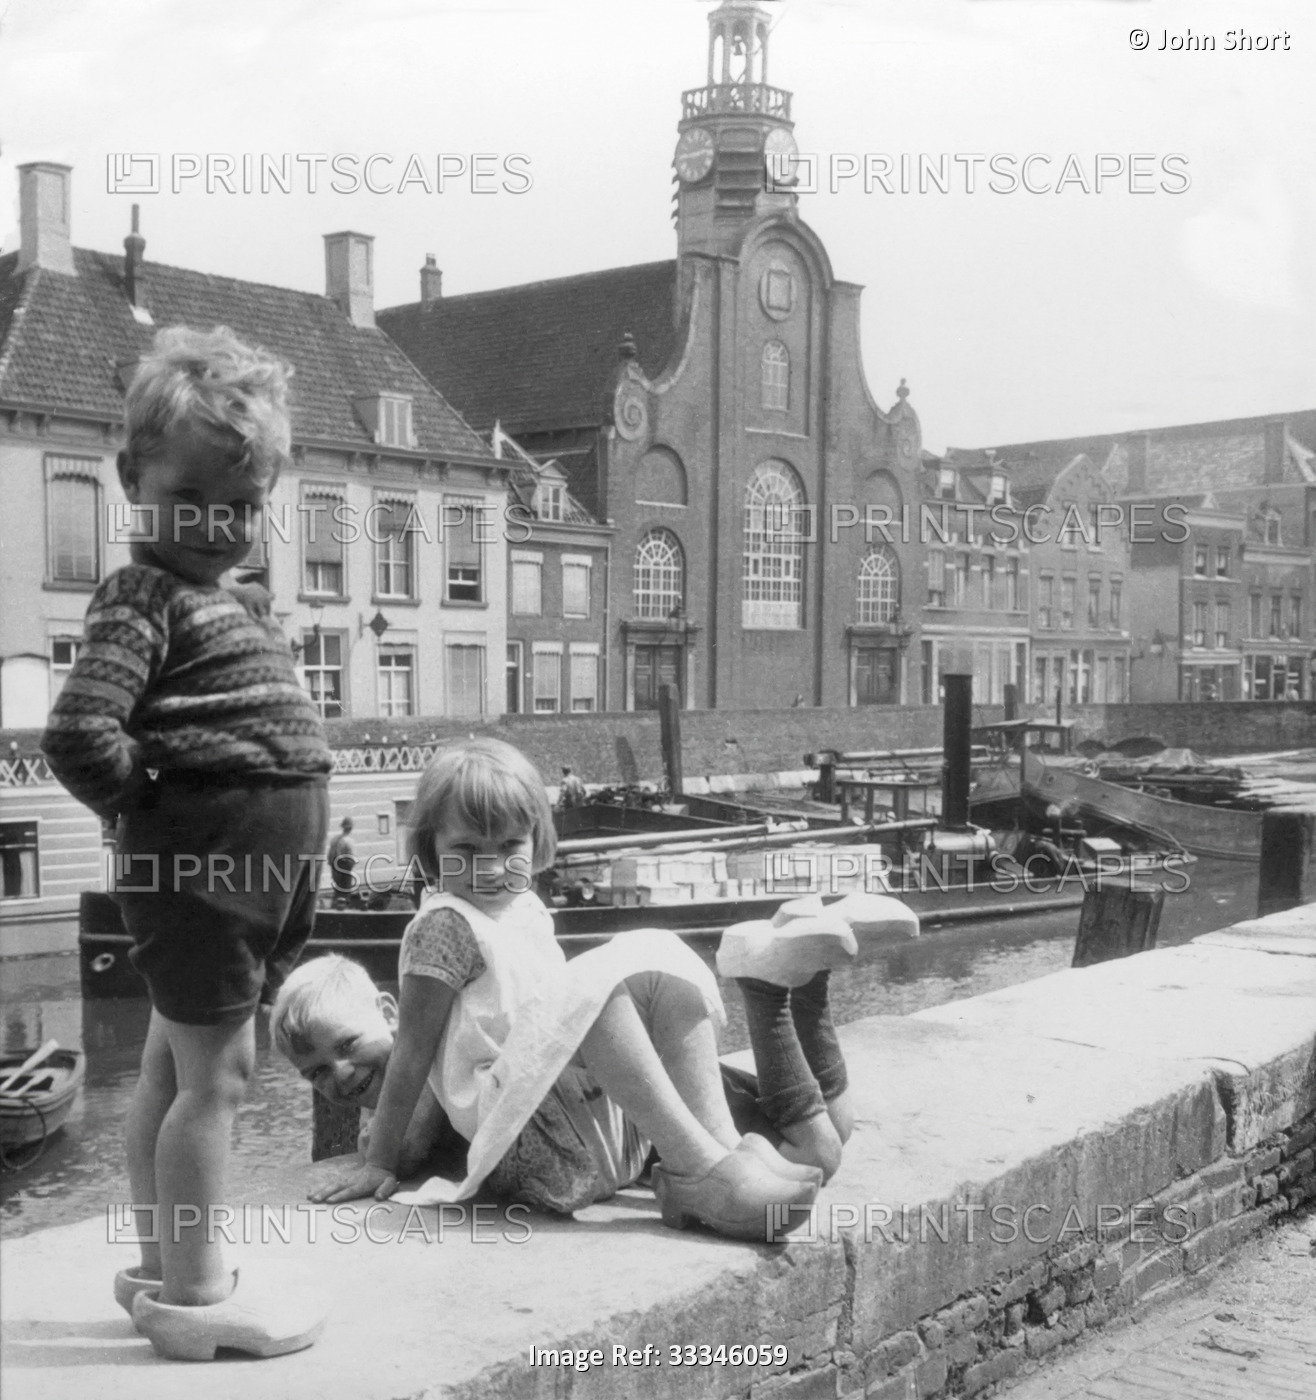 Historic image in black and white of children playing together along the canal ...